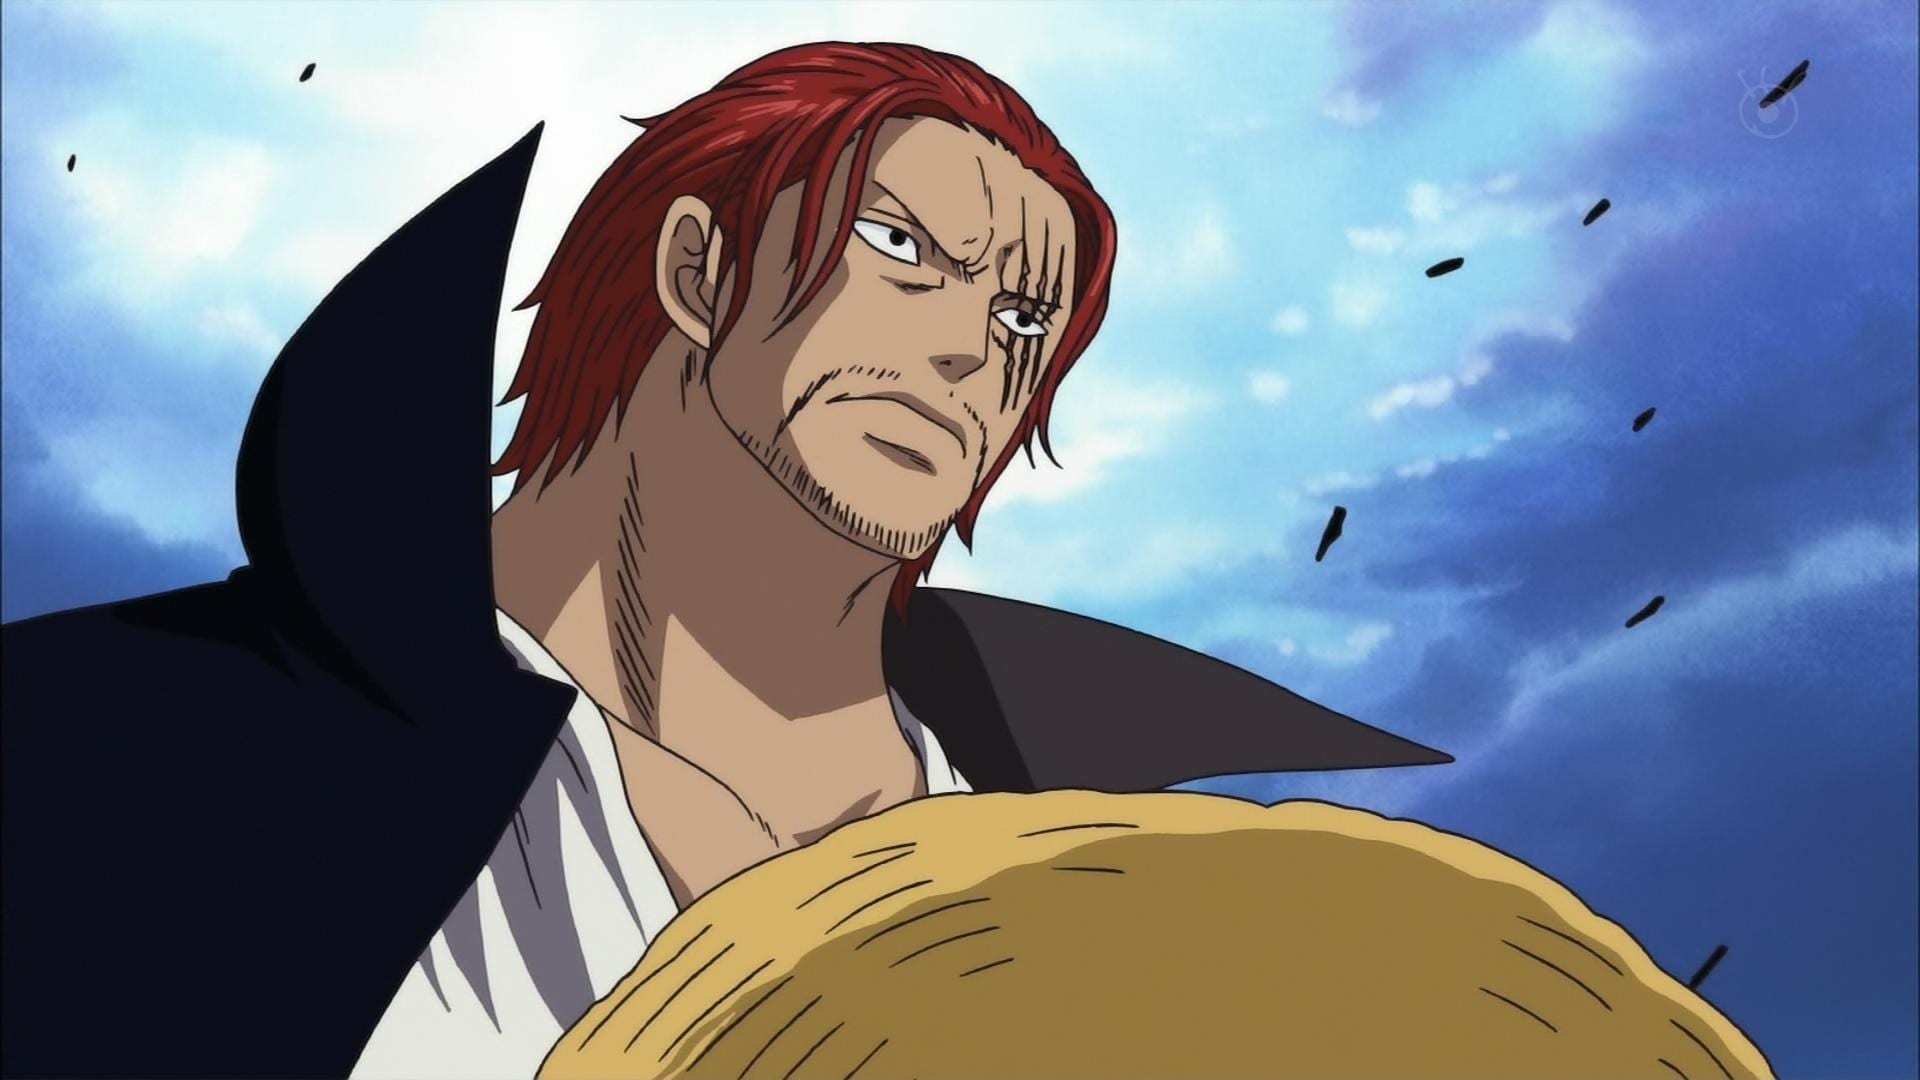 Strongest One Piece Characters of all time, end of series